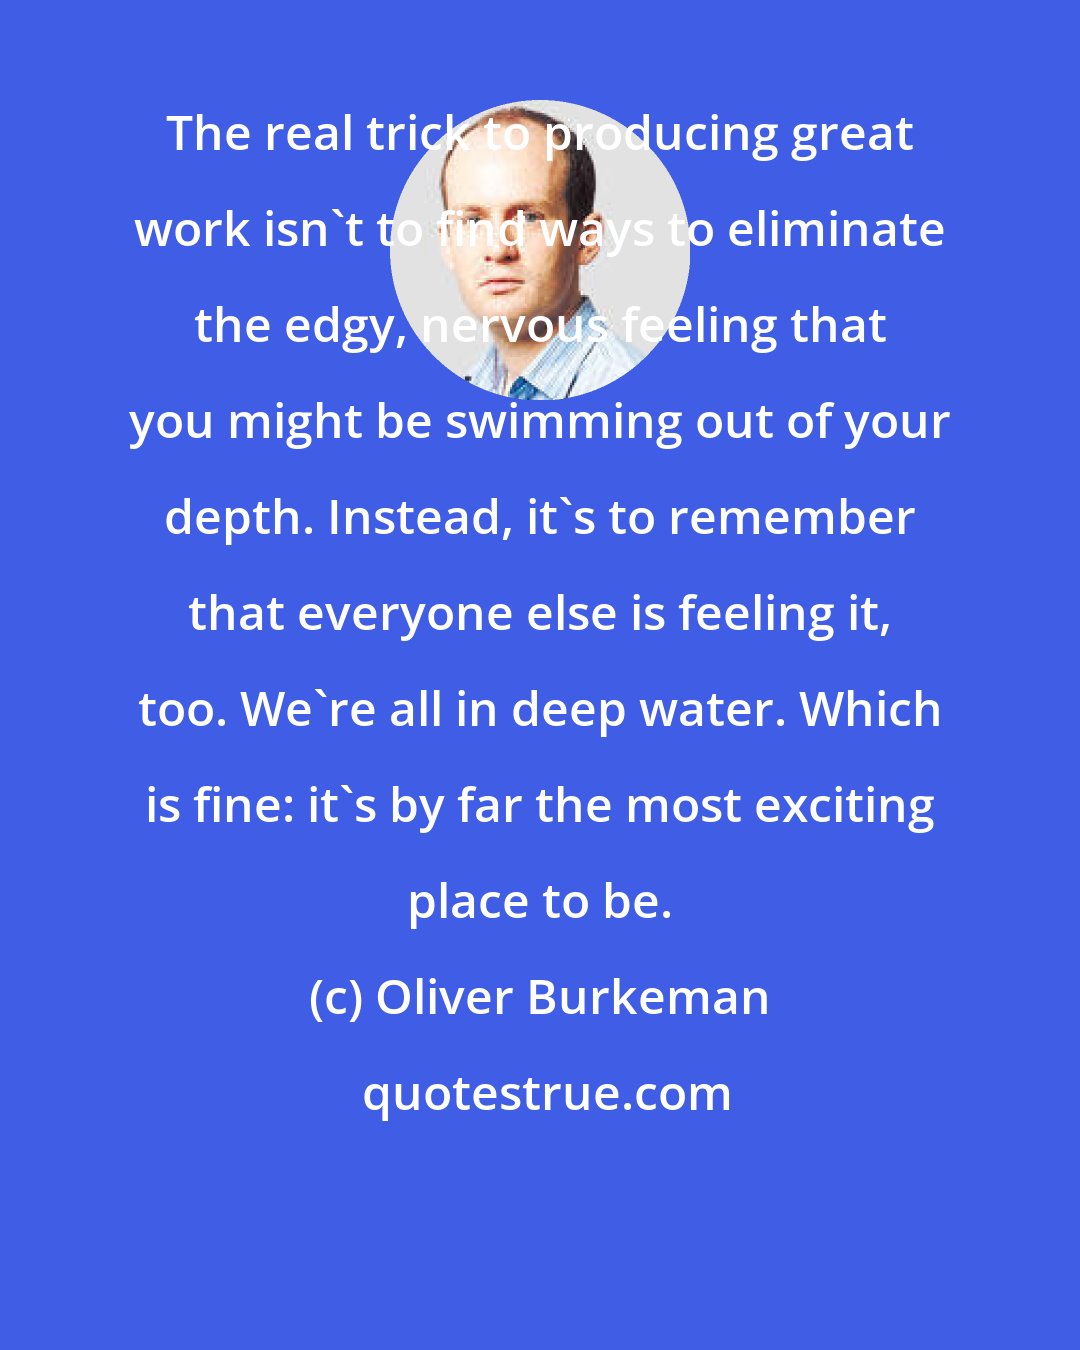 Oliver Burkeman: The real trick to producing great work isn't to find ways to eliminate the edgy, nervous feeling that you might be swimming out of your depth. Instead, it's to remember that everyone else is feeling it, too. We're all in deep water. Which is fine: it's by far the most exciting place to be.